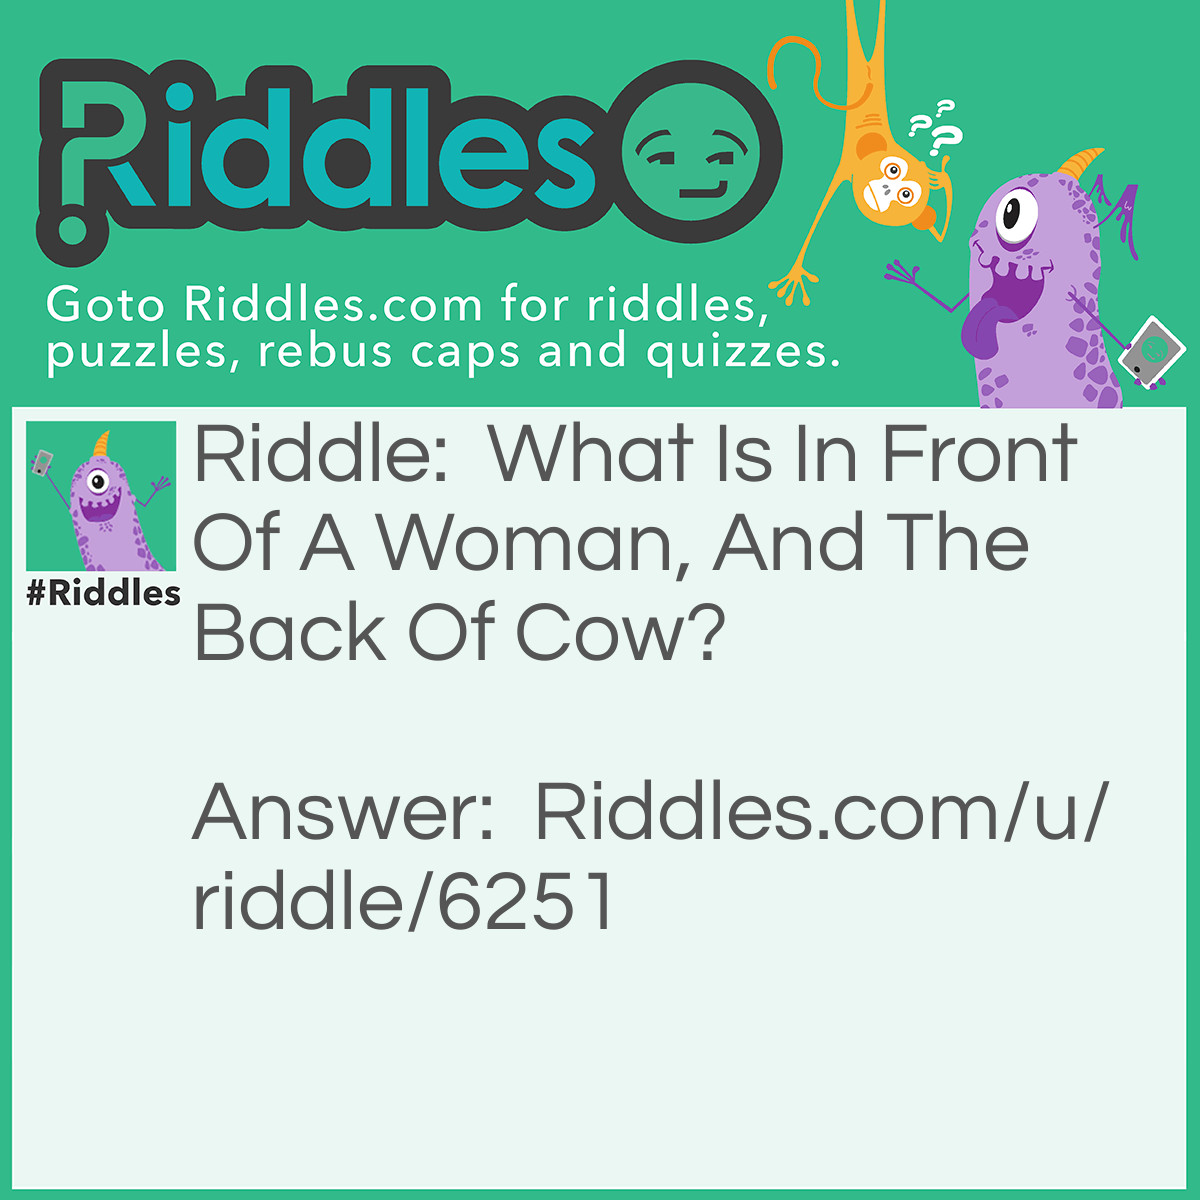 Riddle: What Is In Front Of A Woman, And The Back Of Cow? Answer: The Letter W.